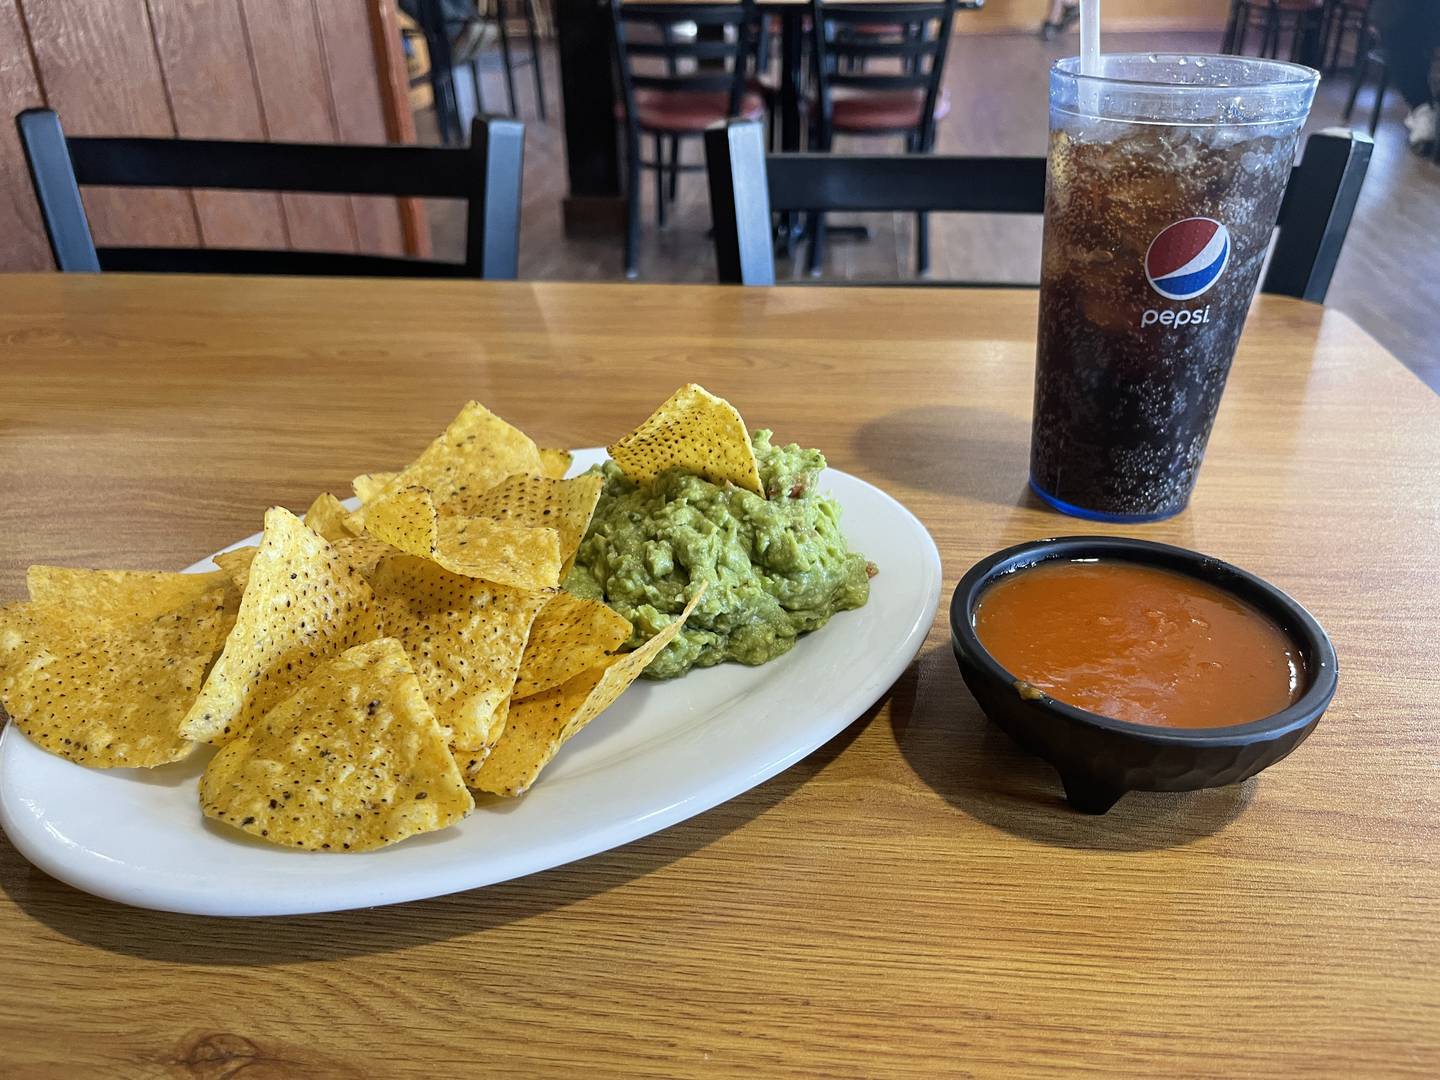 Both the chips and salsa had great flavor and are more than enough while waiting for food.